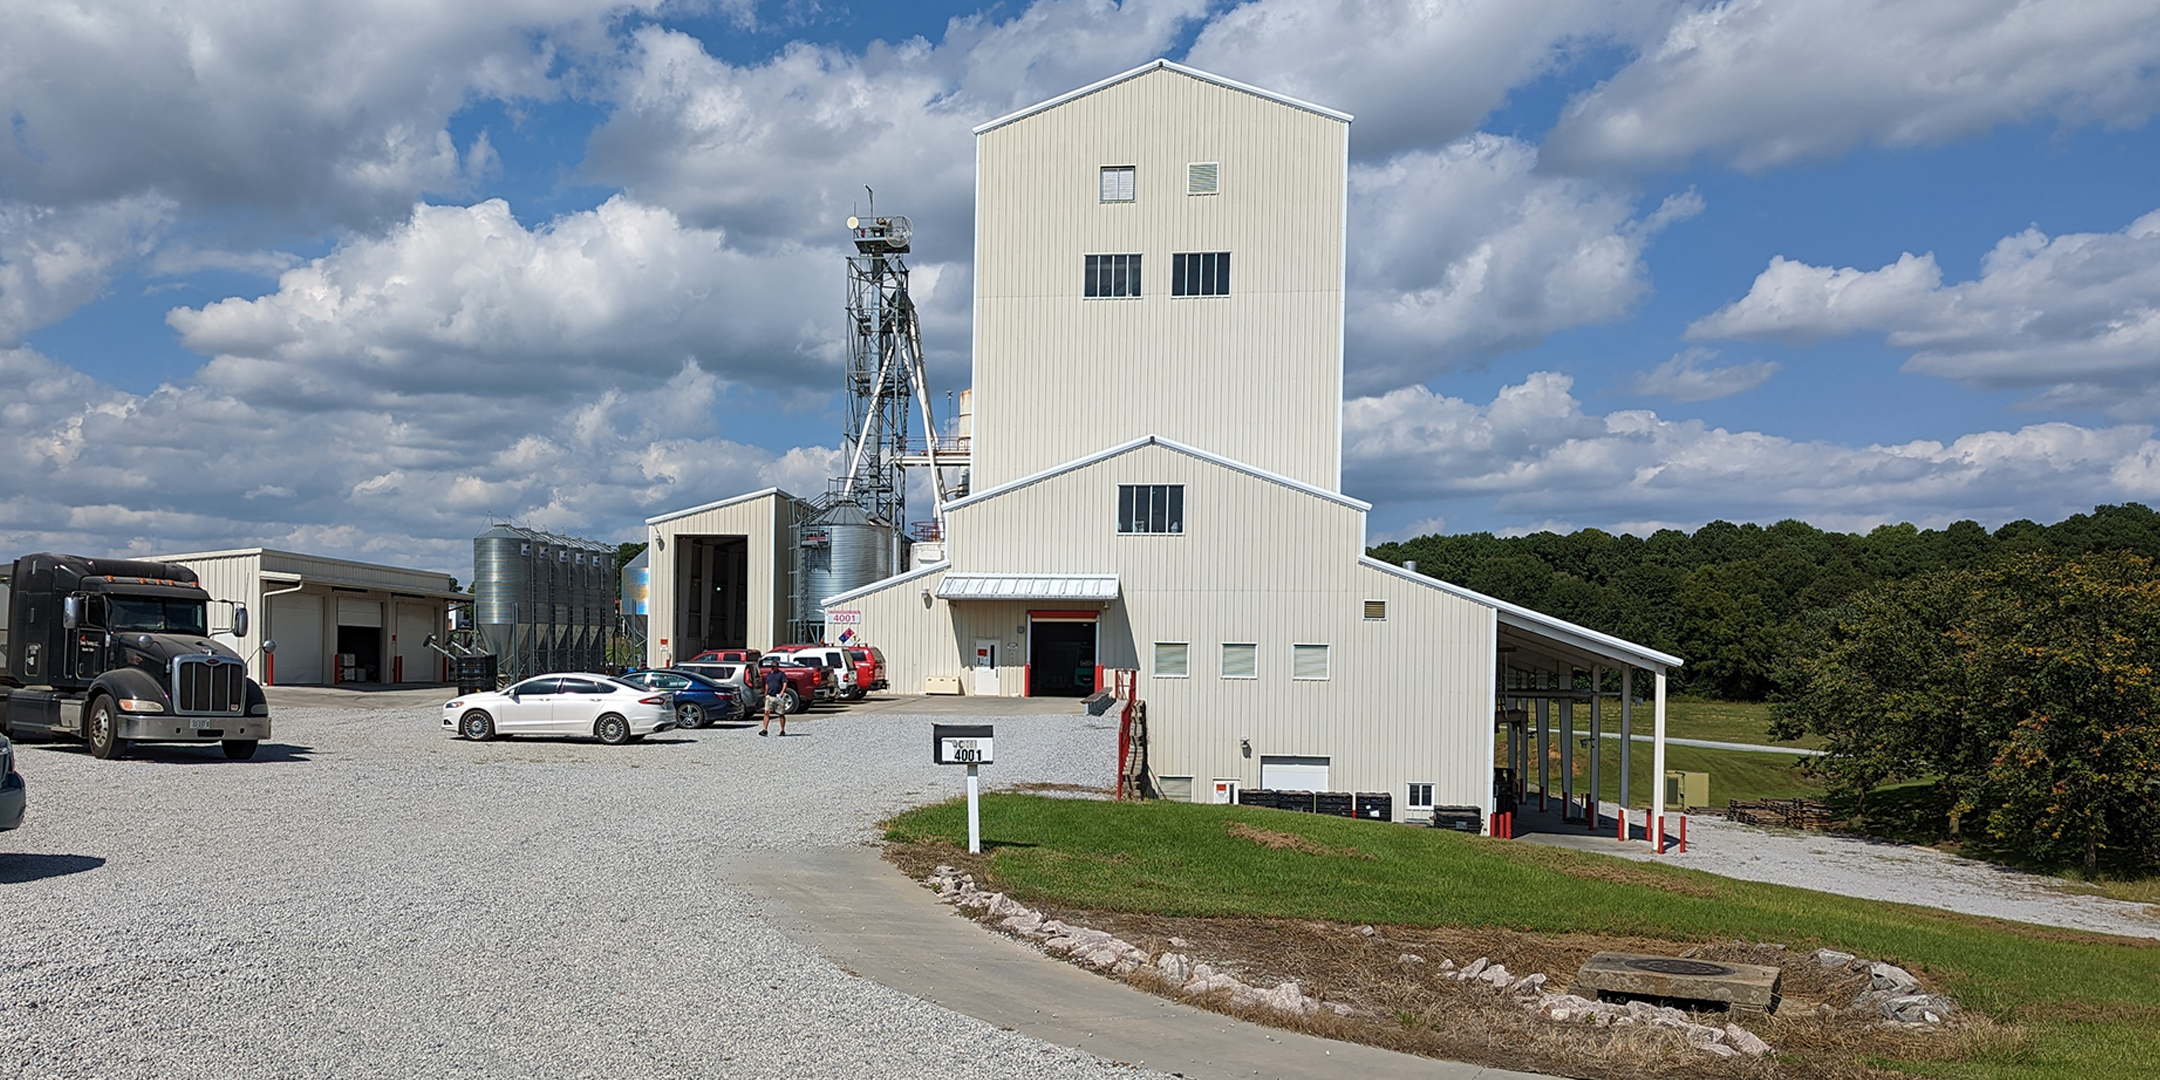 A feed mill with cars and trucks in the parking lot outside.